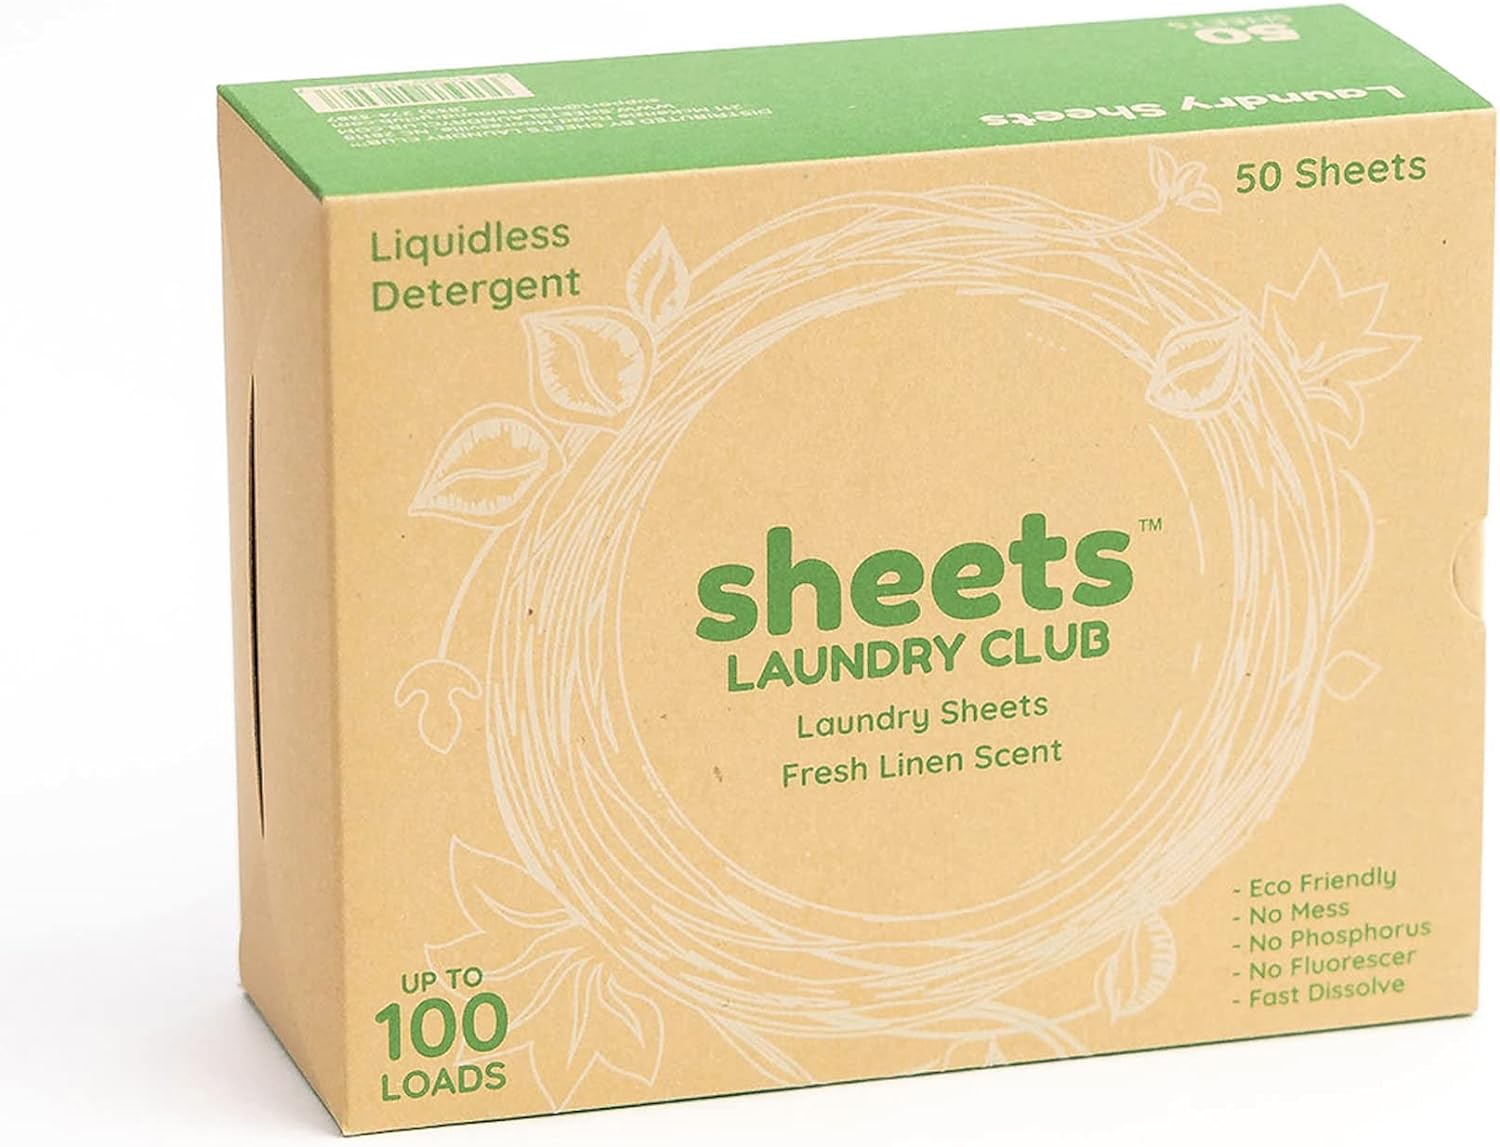 Sheets Laundry Club - US Veteran Owned Company -Laundry Detergent (Up to 100 Loads) 50 Laundry Sheets- Fresh Linen Scent - New Liquid-Less Technology - Lightweight - Easy To Use -